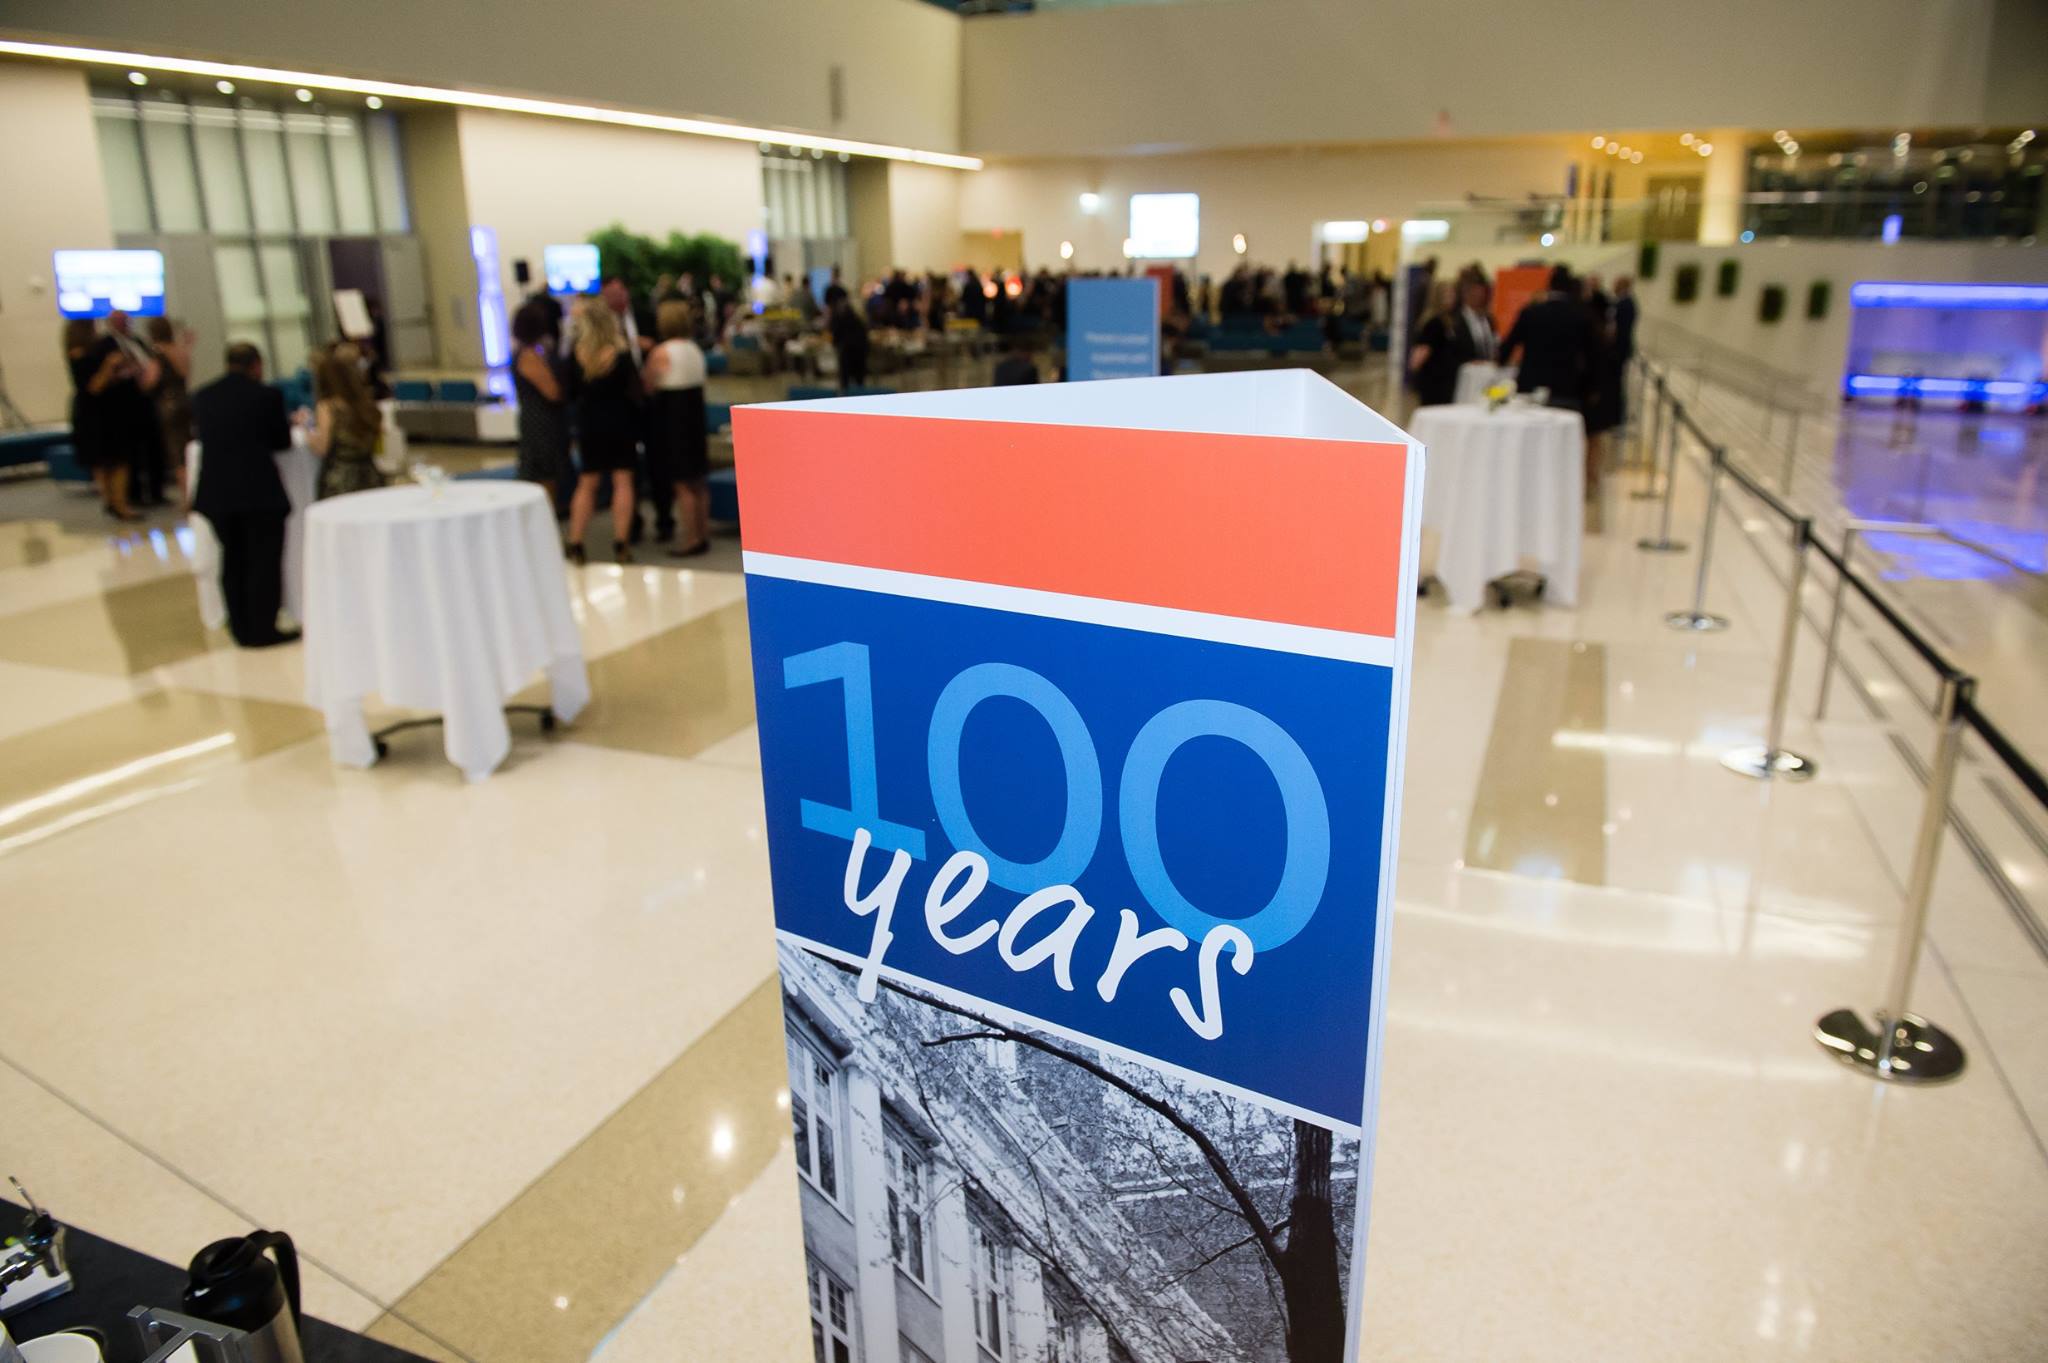 The Center 100 year sign.jpg